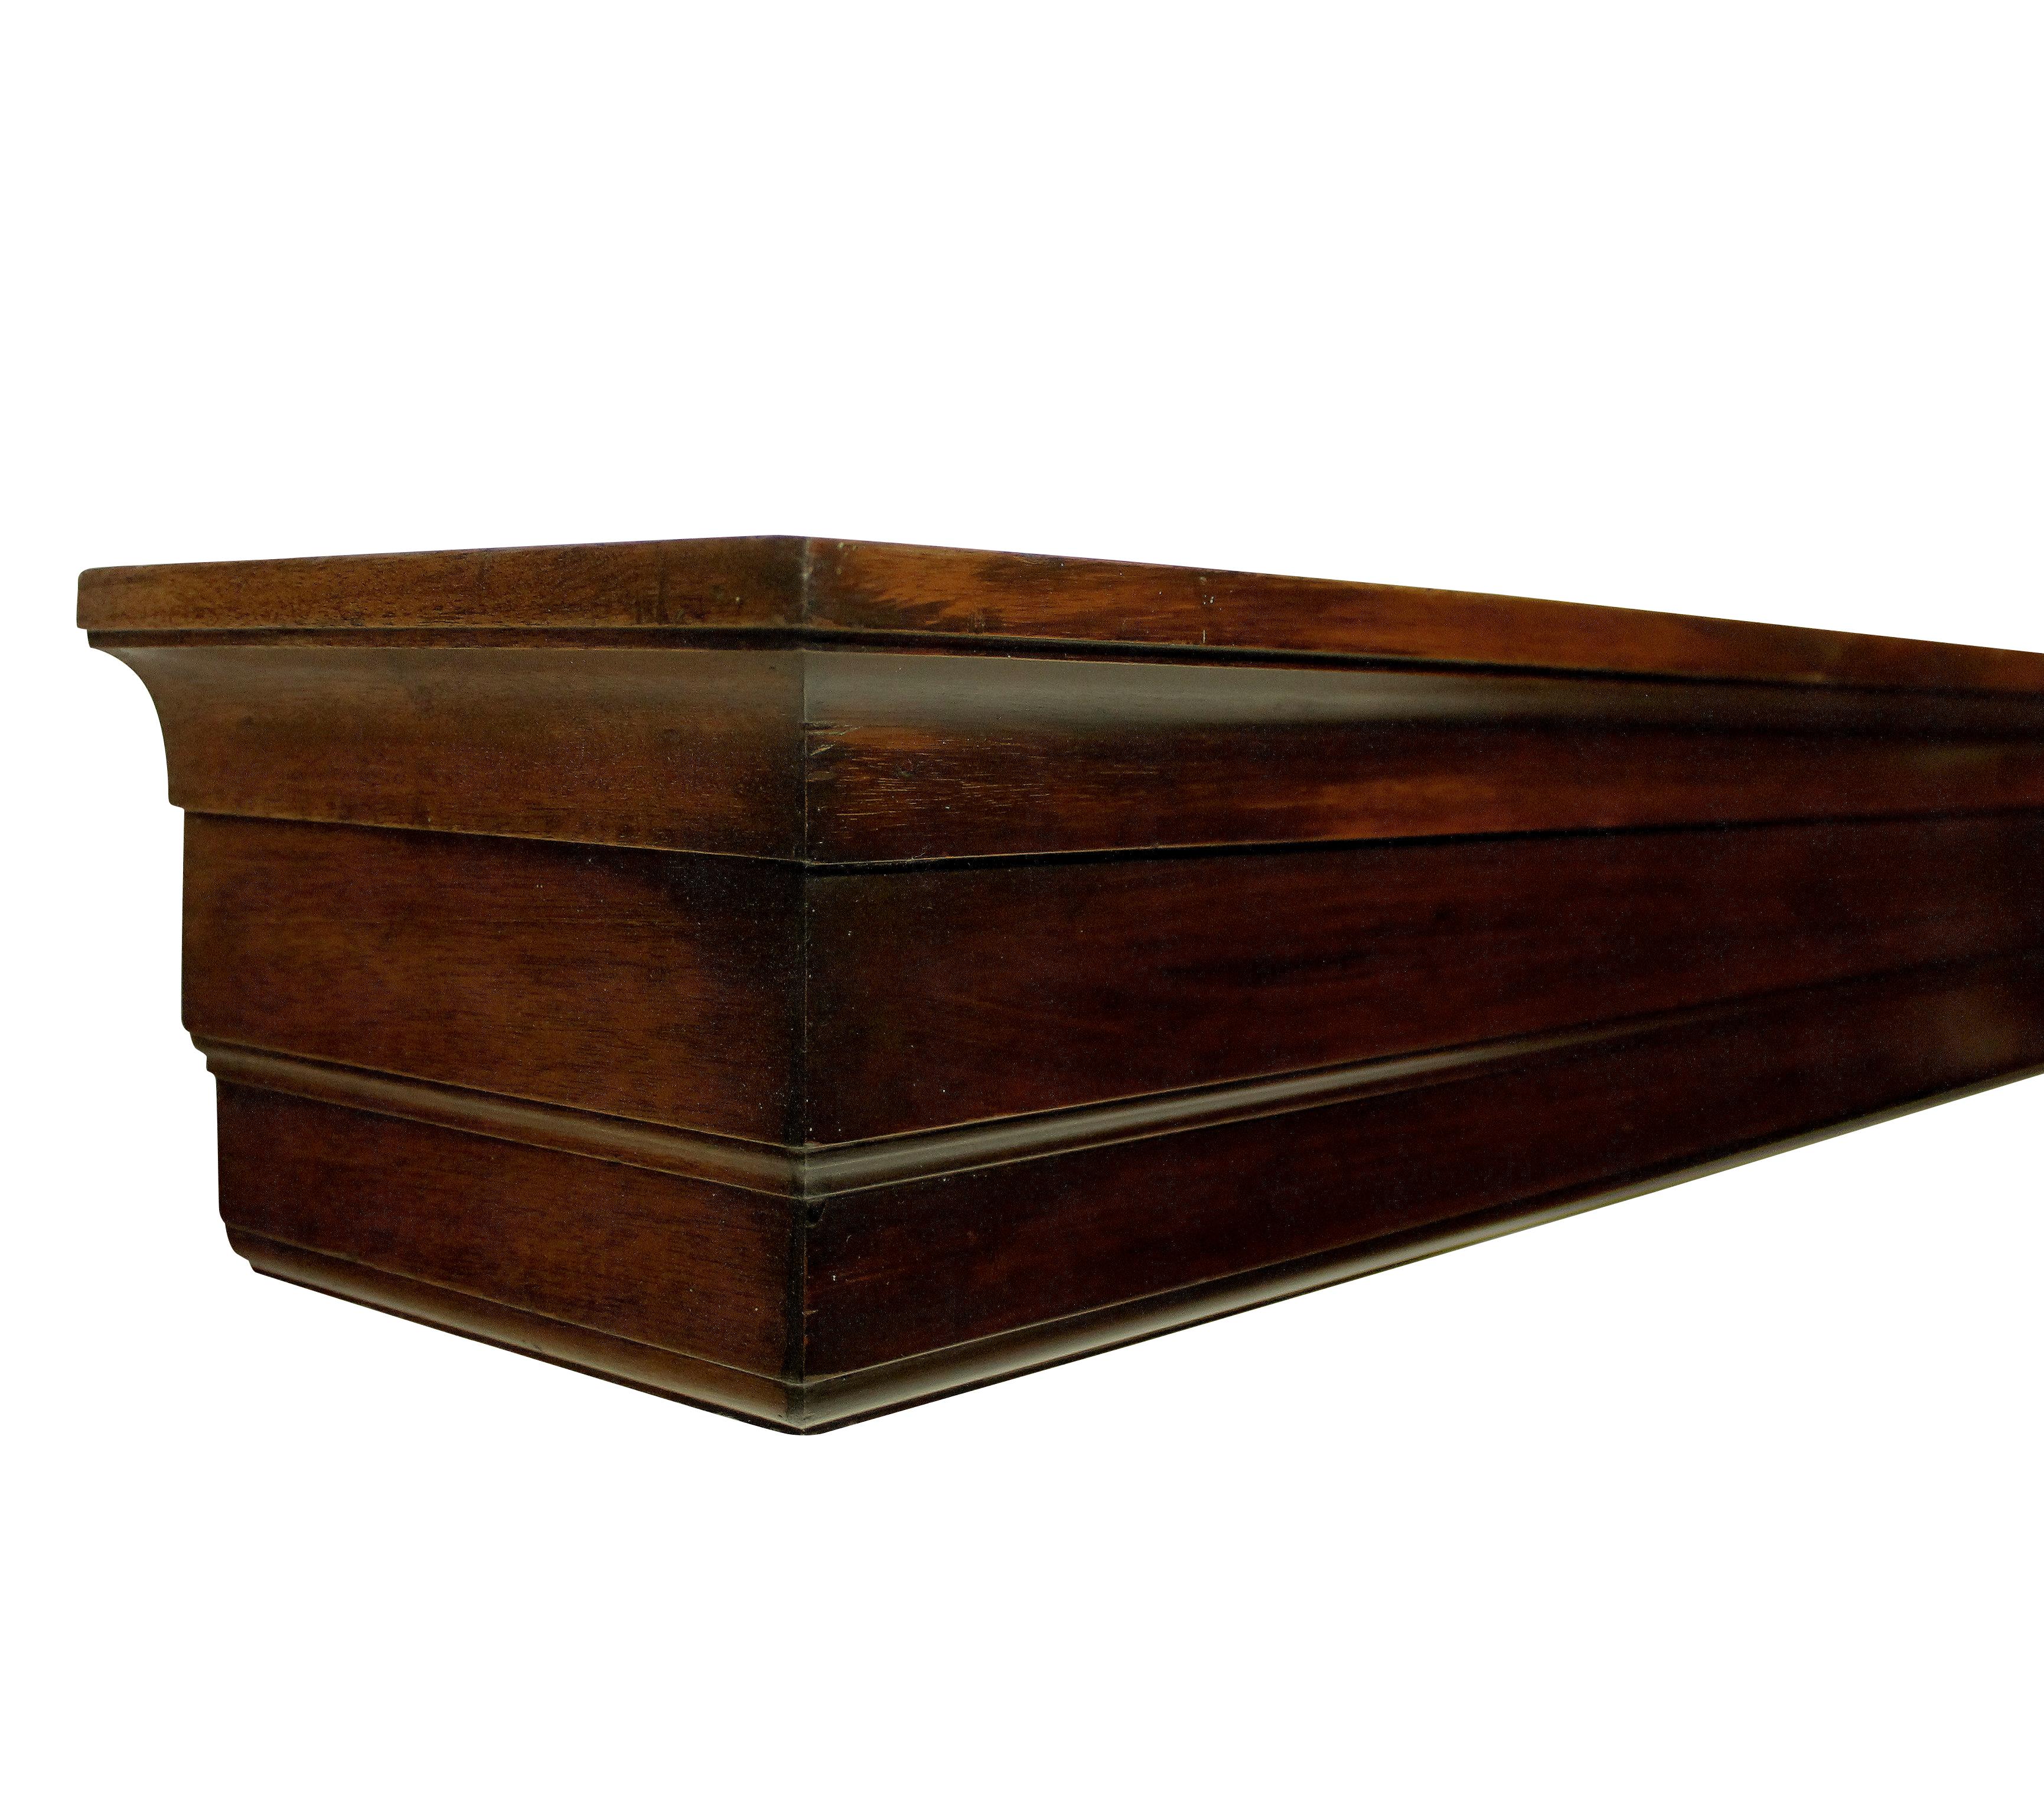 A rare opportunity to own a piece of furniture designed by Sir Edwin Lutyens.
This pair of pelmets were designed by Lutyens for the billiard room of Papillon Hall in 1903. Of simple linear form, made from carved and lacquered mahogany. The house